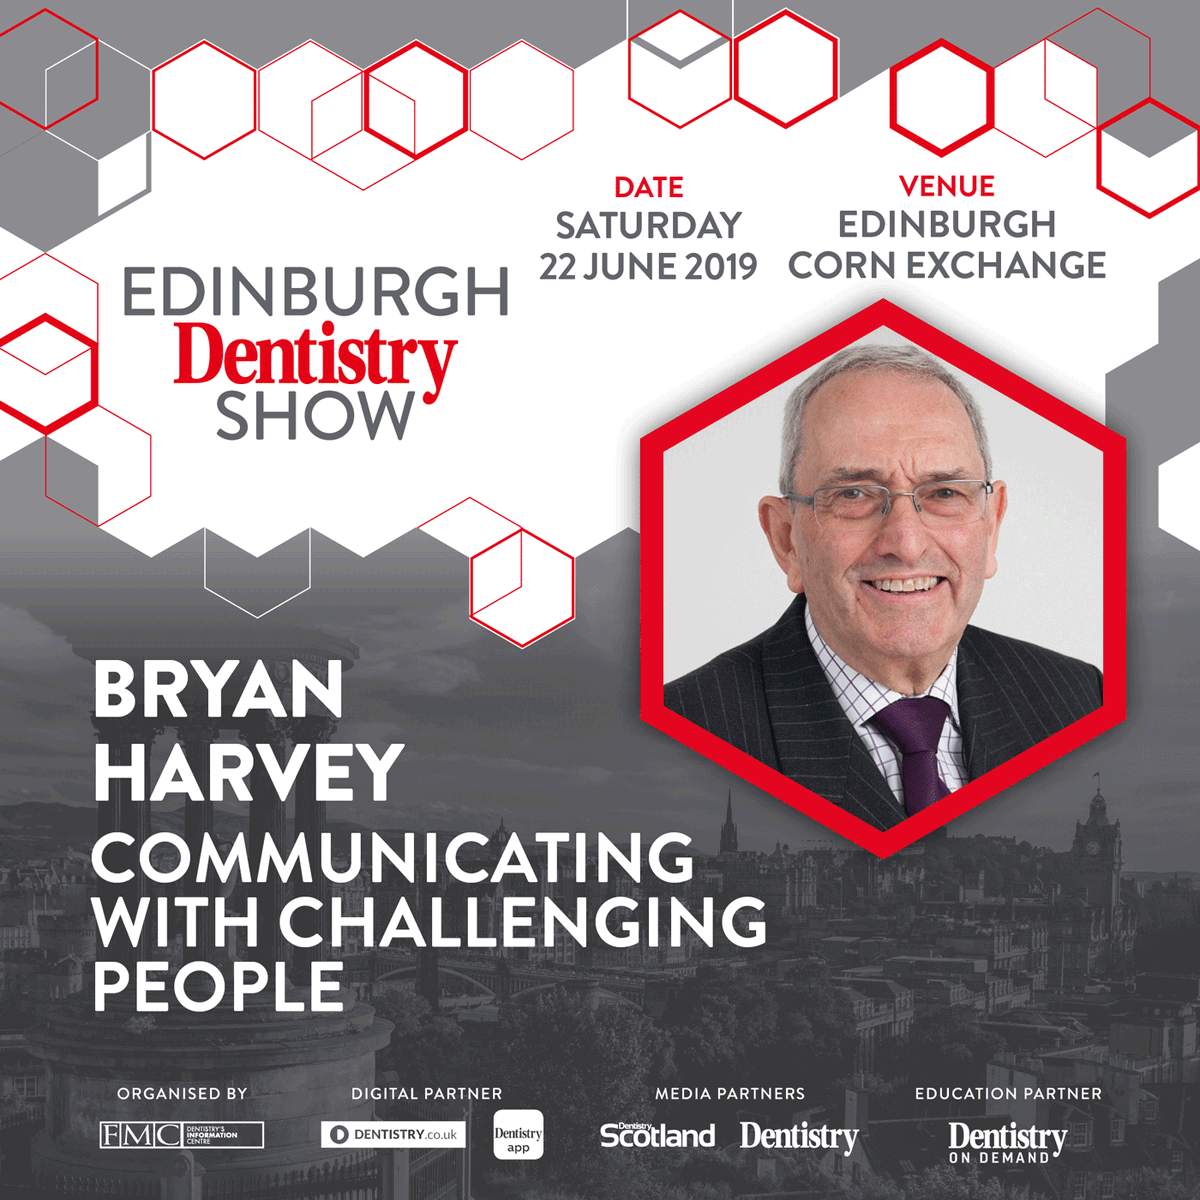 Bryan Harvey will provide insight on communicating with challenging people at the unmissable Edinburgh Dentistry Show on 22 June! Get your free ticket now! 
👉 bit.ly/2VE5LUZ 👈  

#edinburghdentistryshow #dentist #dentistry #digitaldentistry #dentistedinburgh